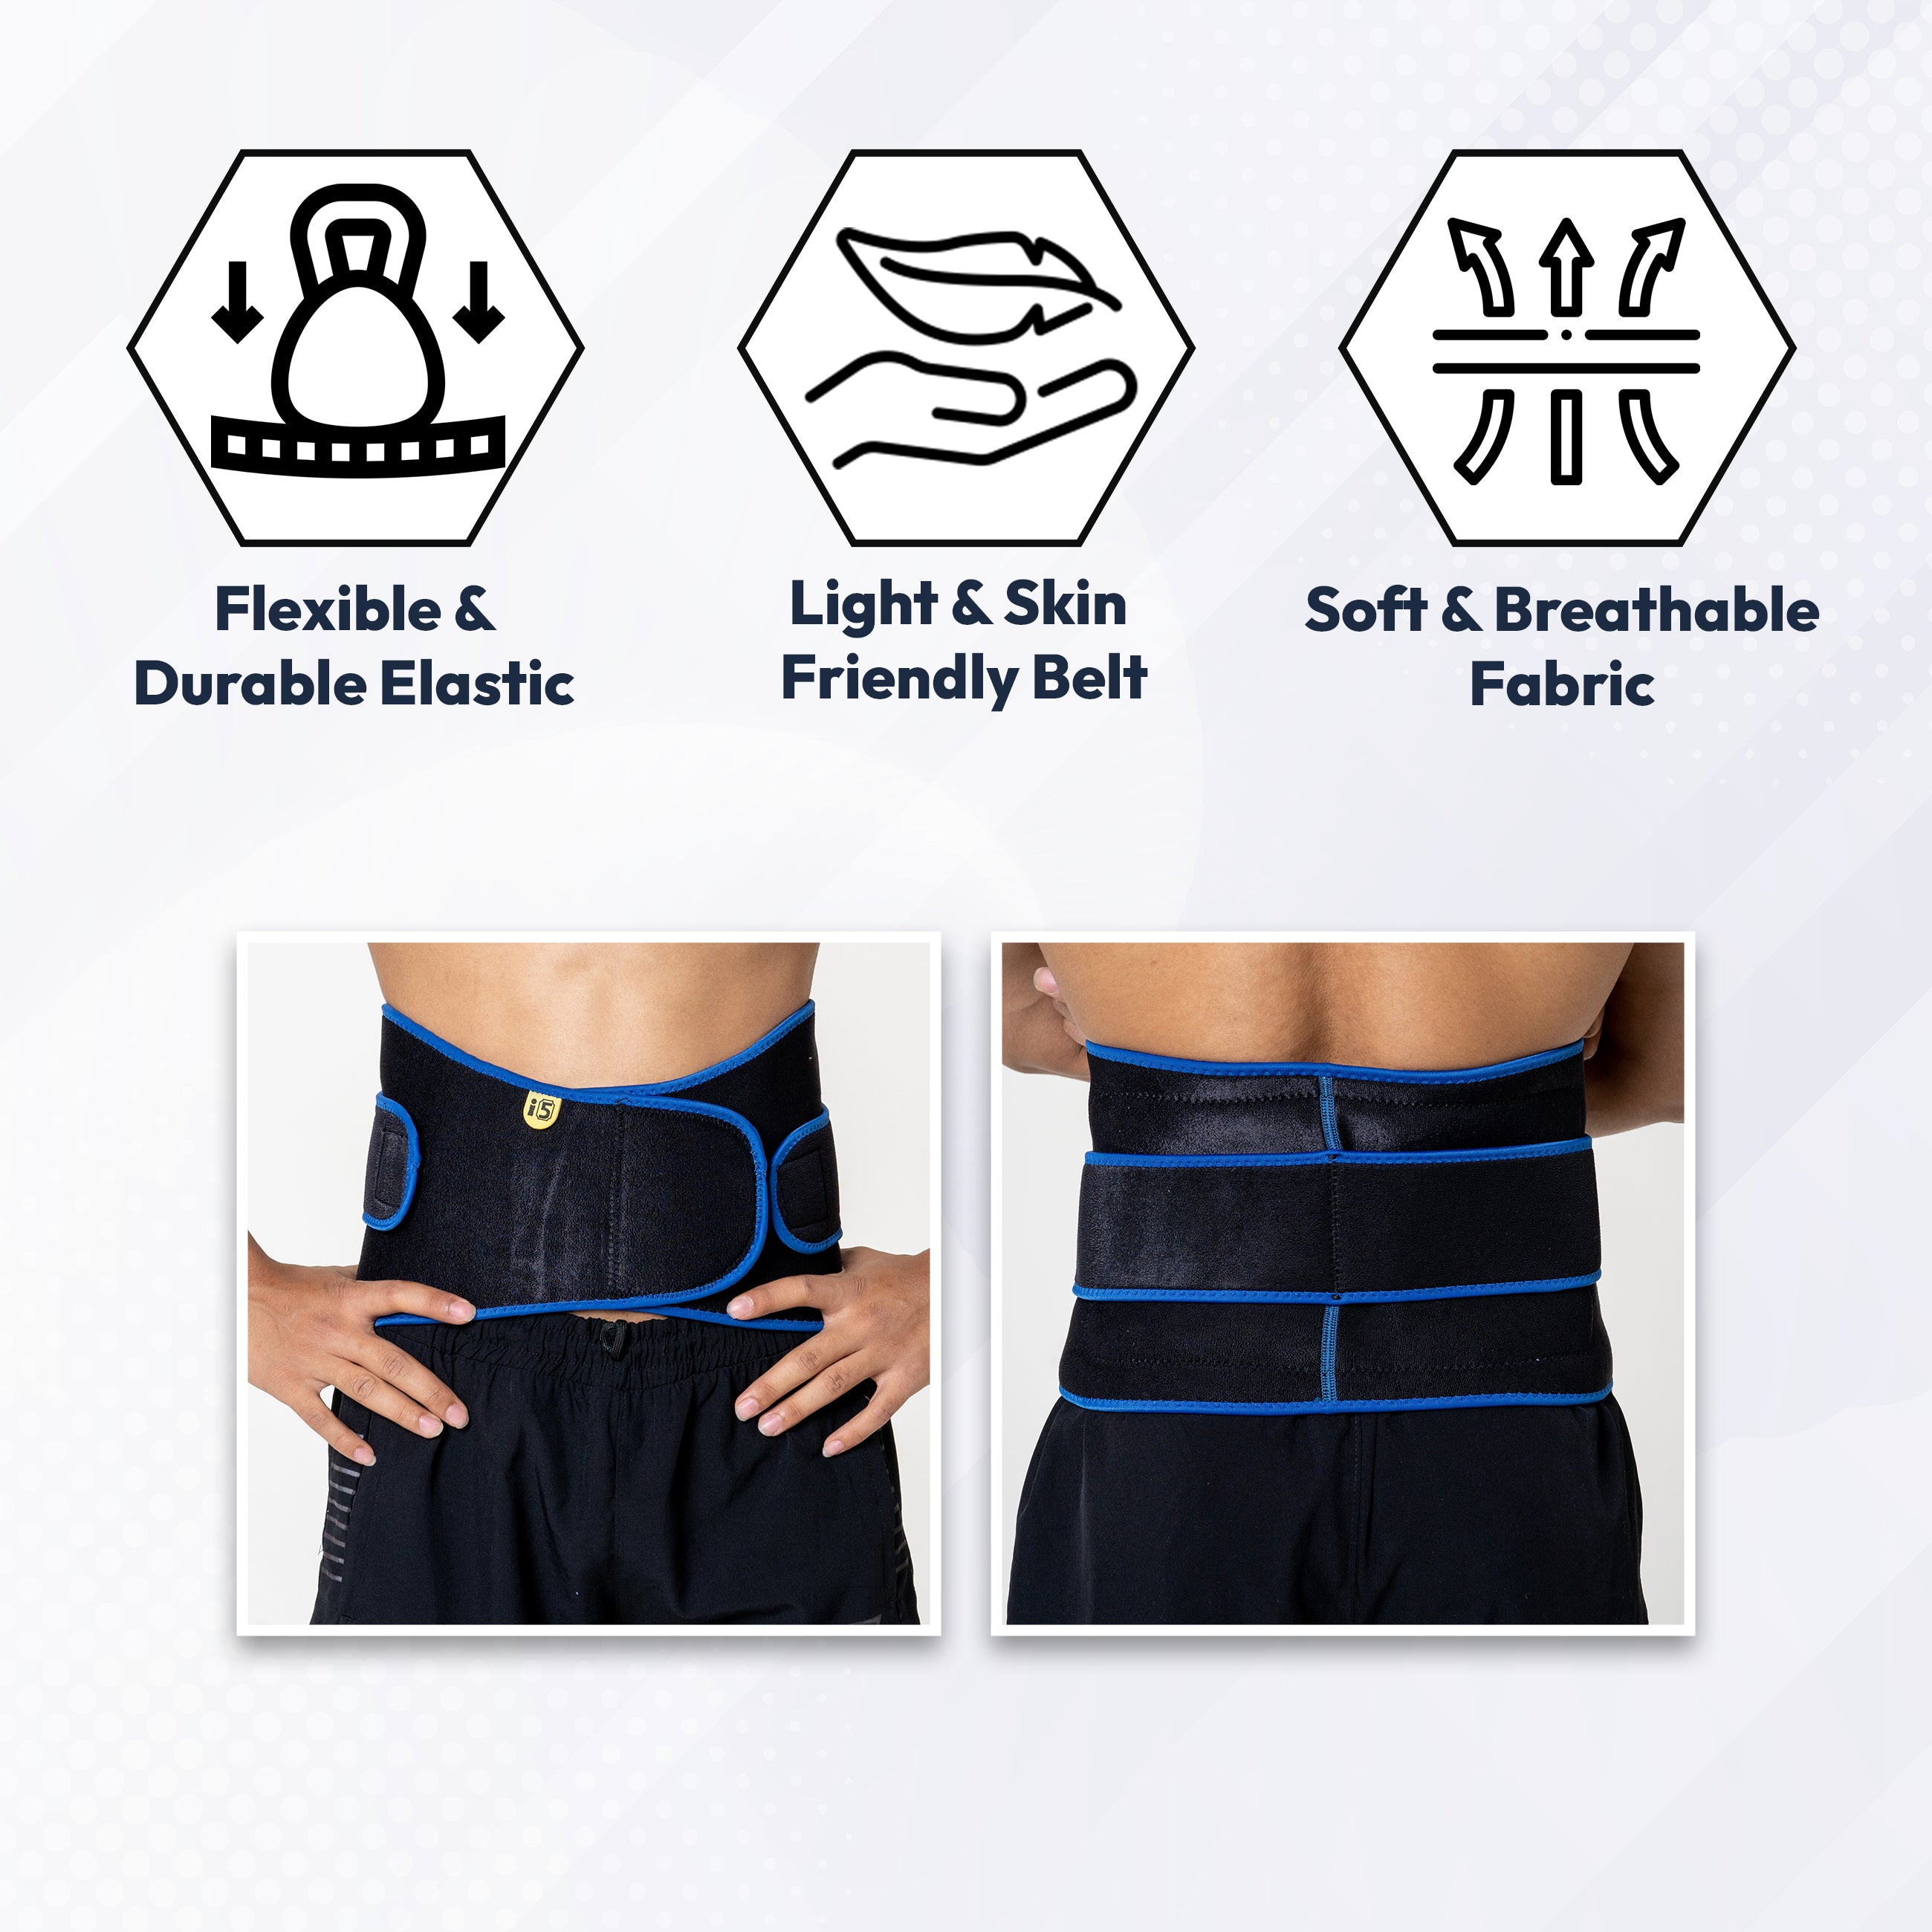 I5Joints- Magnetic Far Infrared Back Support with Stays(Back Support With Stays belt for Lower Back Pain Relief, Better Posture and Pain Relief and Added Gel Padding for Comfort)